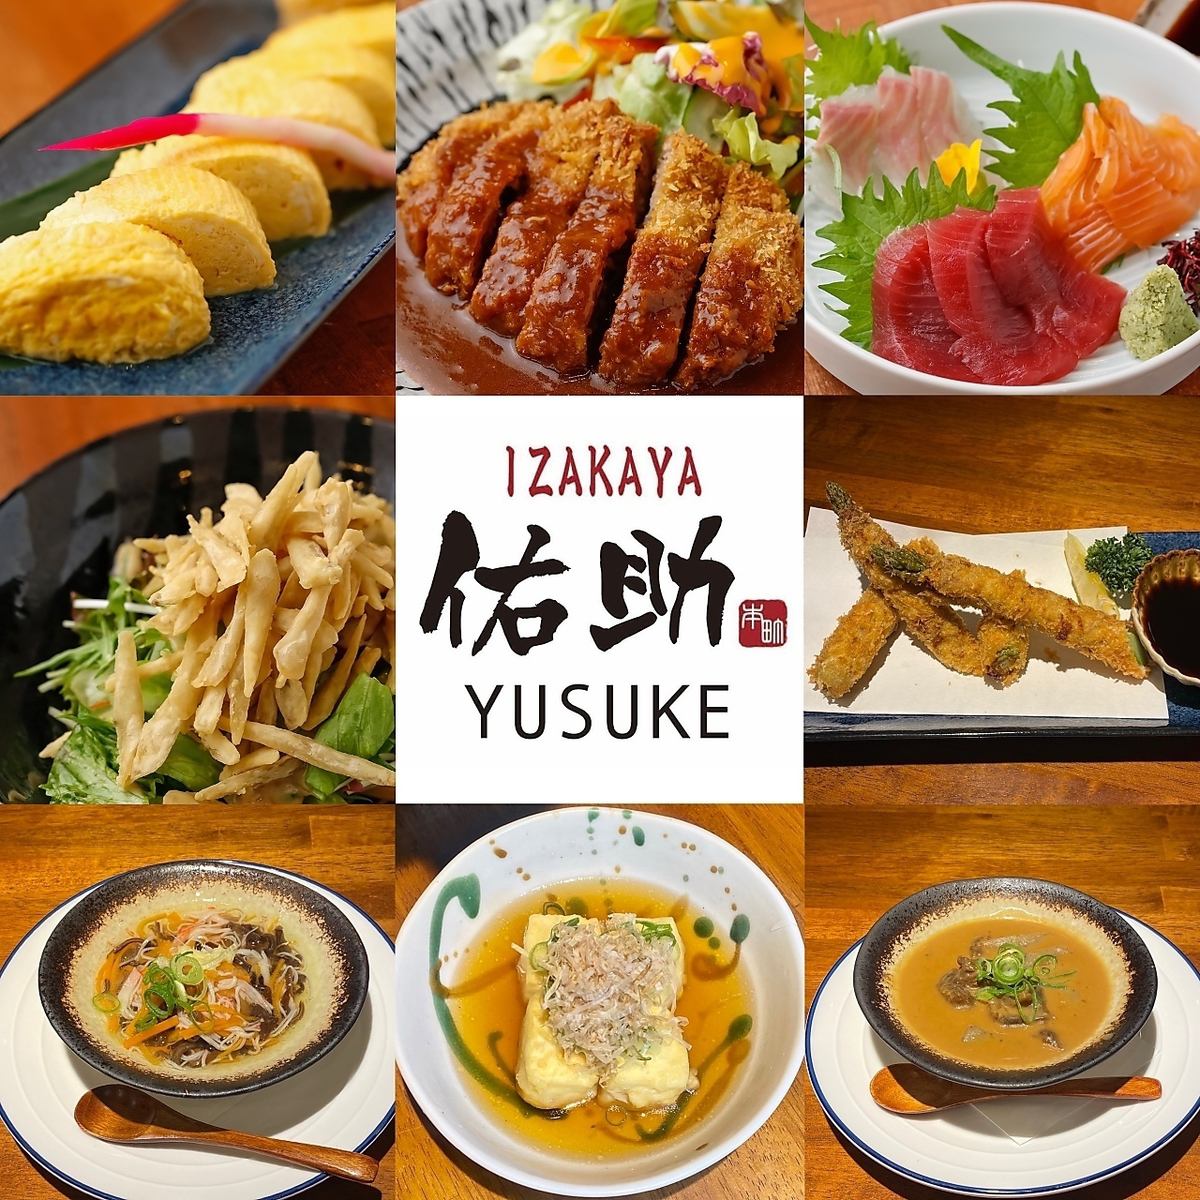 Enjoy a variety of Western and Japanese dishes prepared by chefs over 40 years on this road ♪